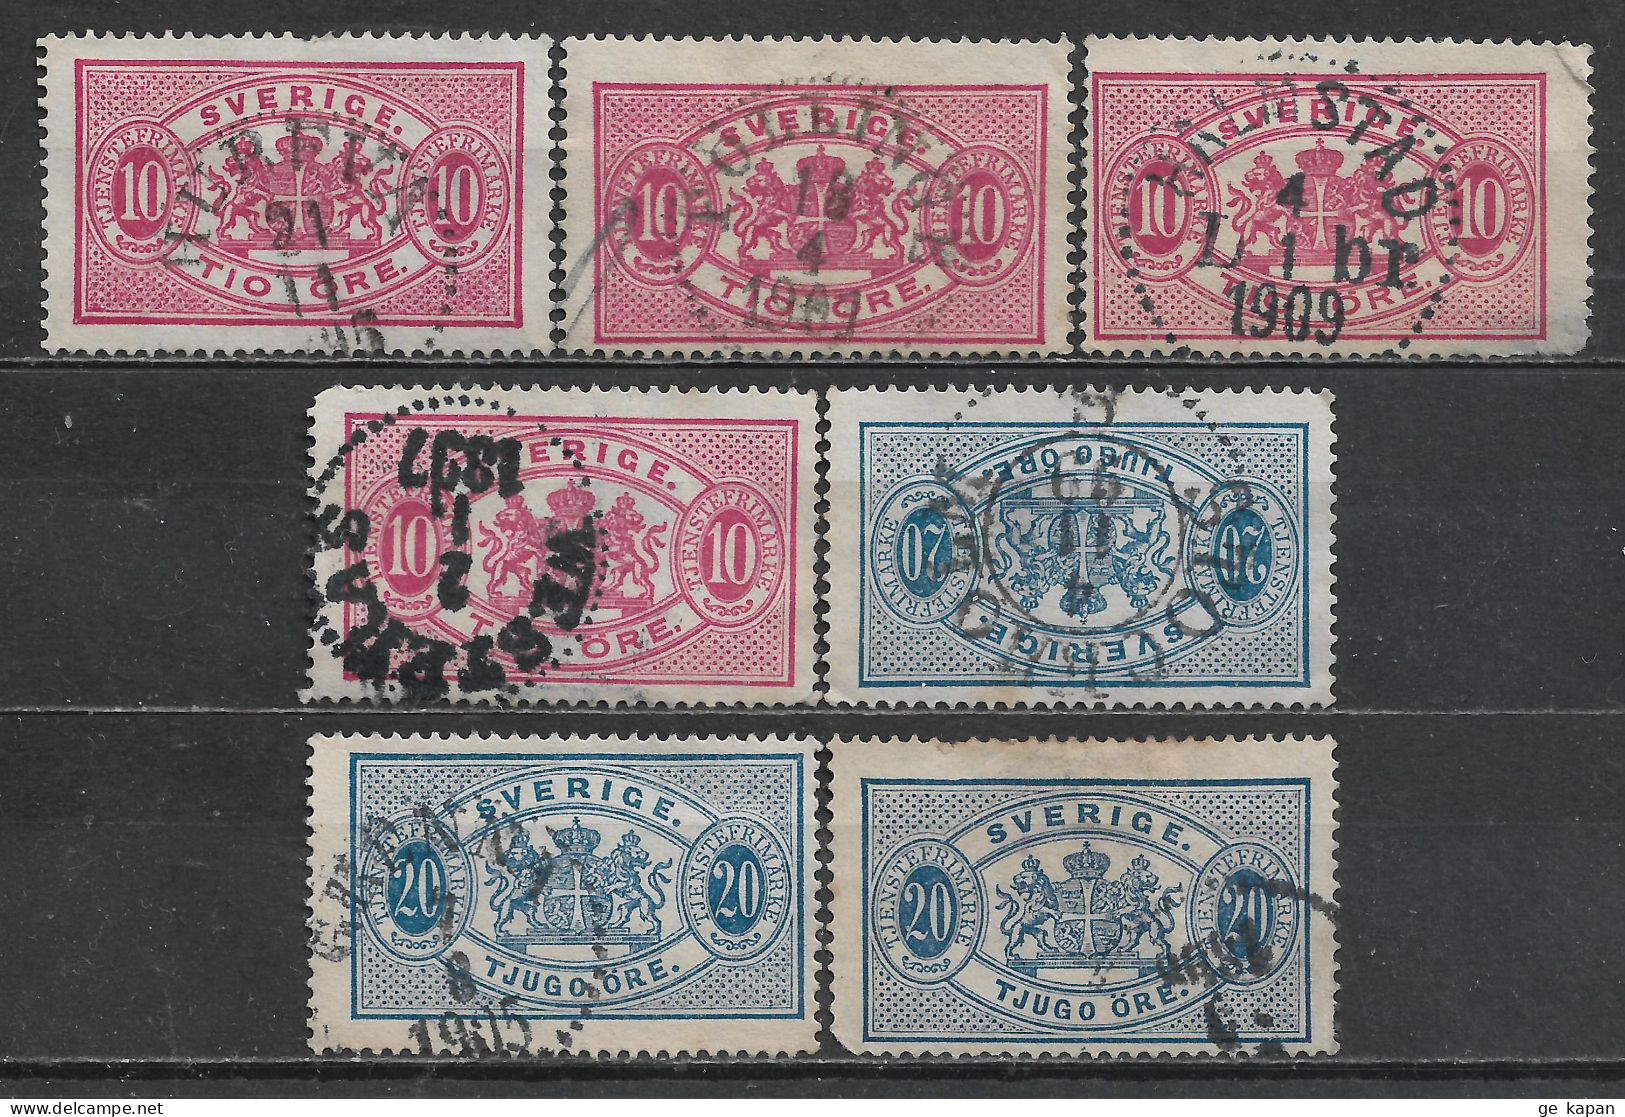 1891,1895 SWEDEN Official Set Of 7 Used Stamps Perf.13 (Scott # O17,O20) CV $2.40 - Servizio